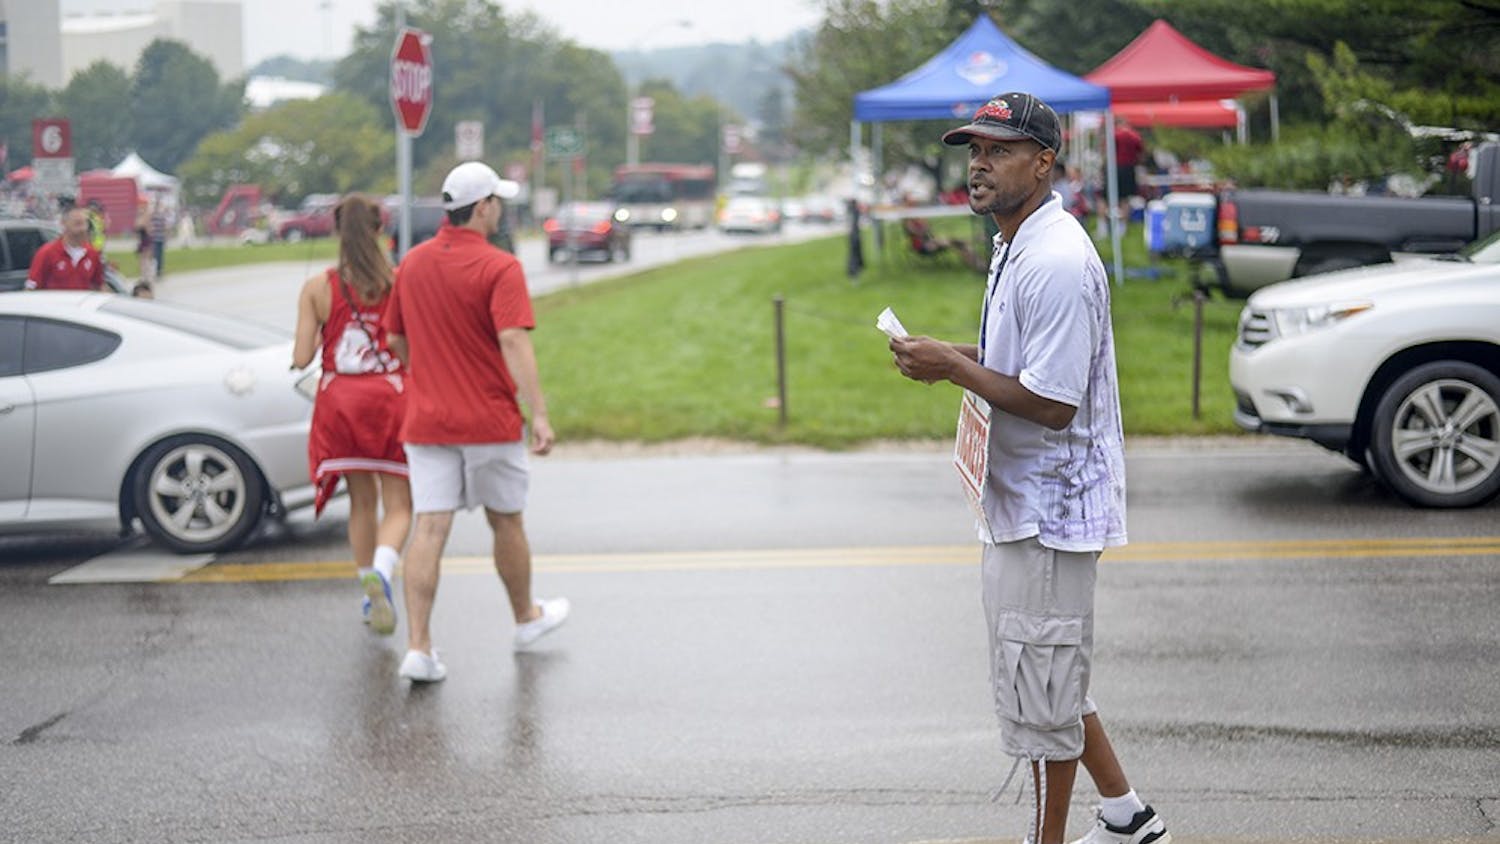 Most people walk right past Jeffery while he scalps for tickets, but persistence gets him closer to his goal between $200 and $300 for each game. "You'll get 15,000 no's before you hear a yes," Jeffery said. "You can't be sensitive in this business." 